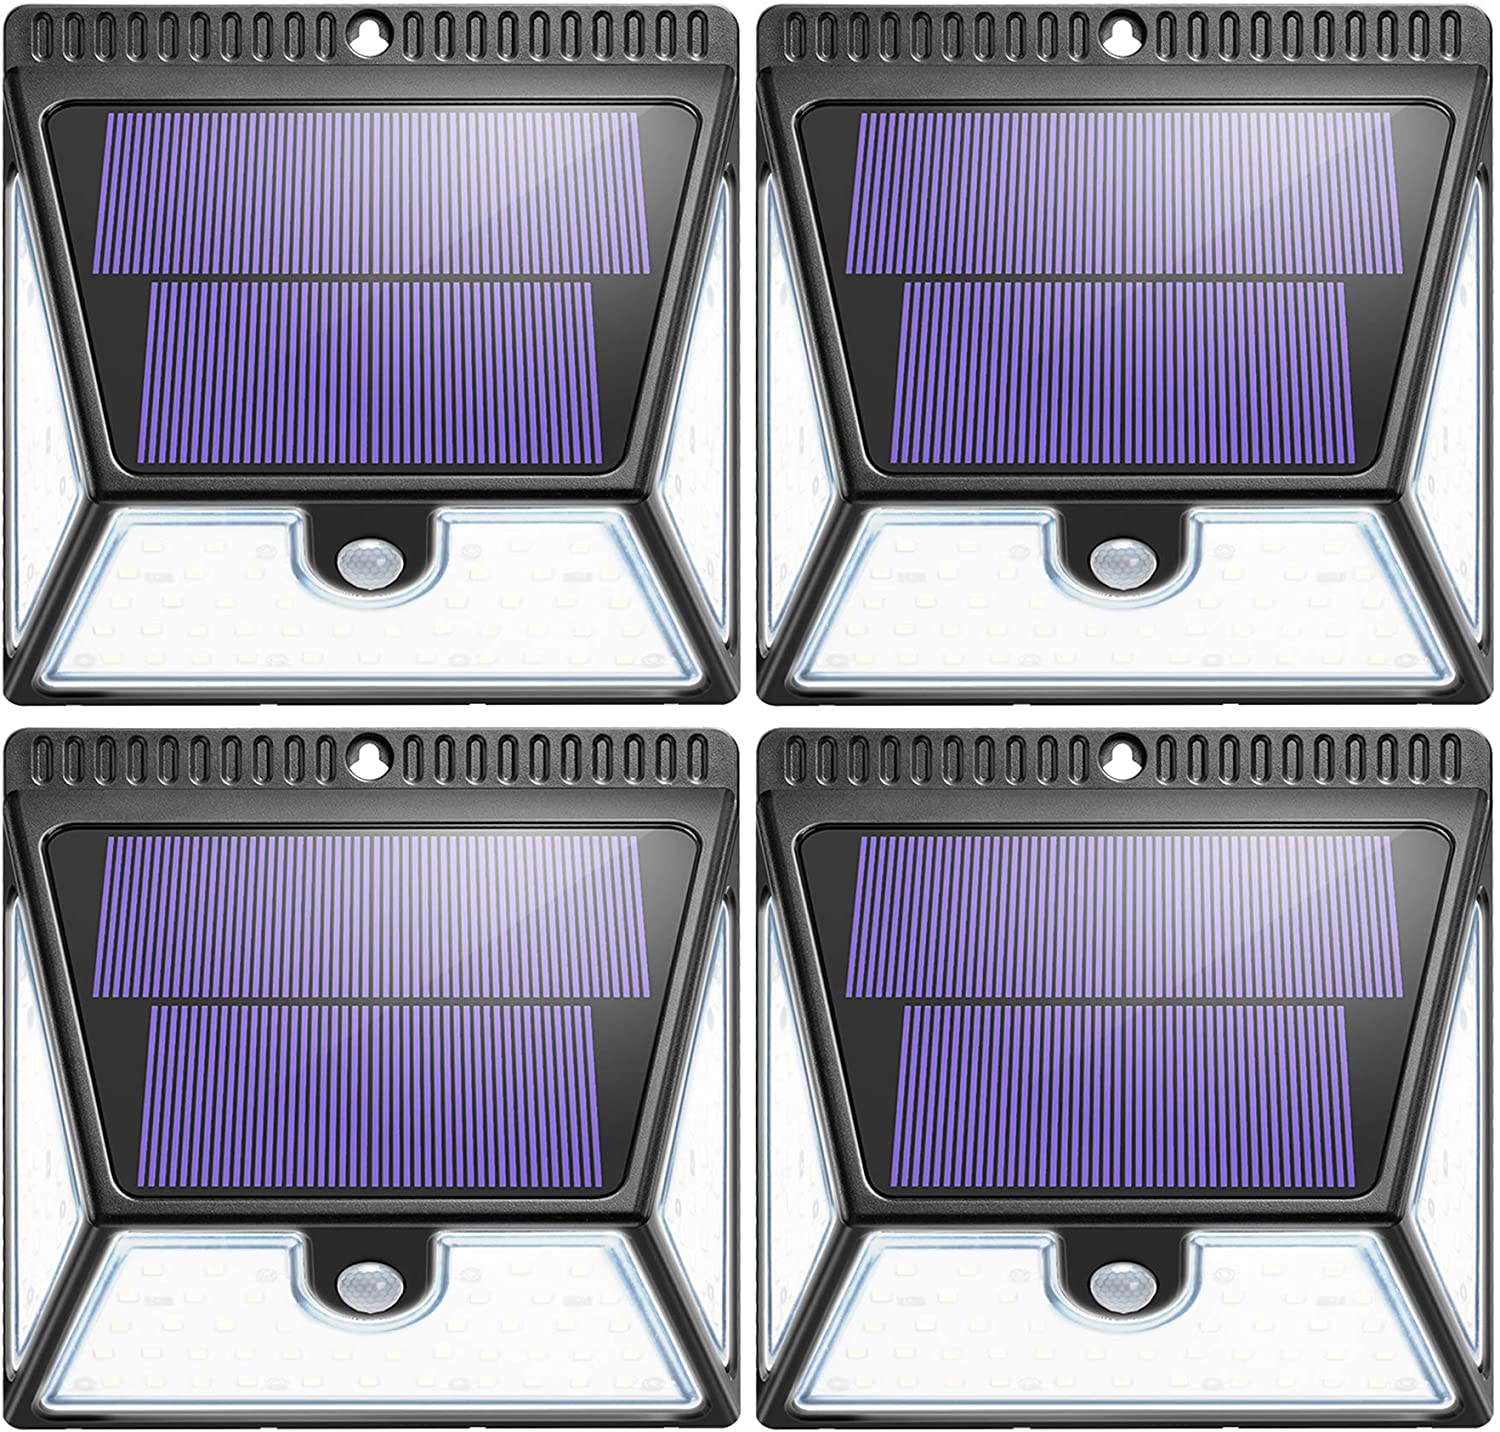 4 Pack 82 Led Solar Lights Outdoor for $21.99 (45% off)